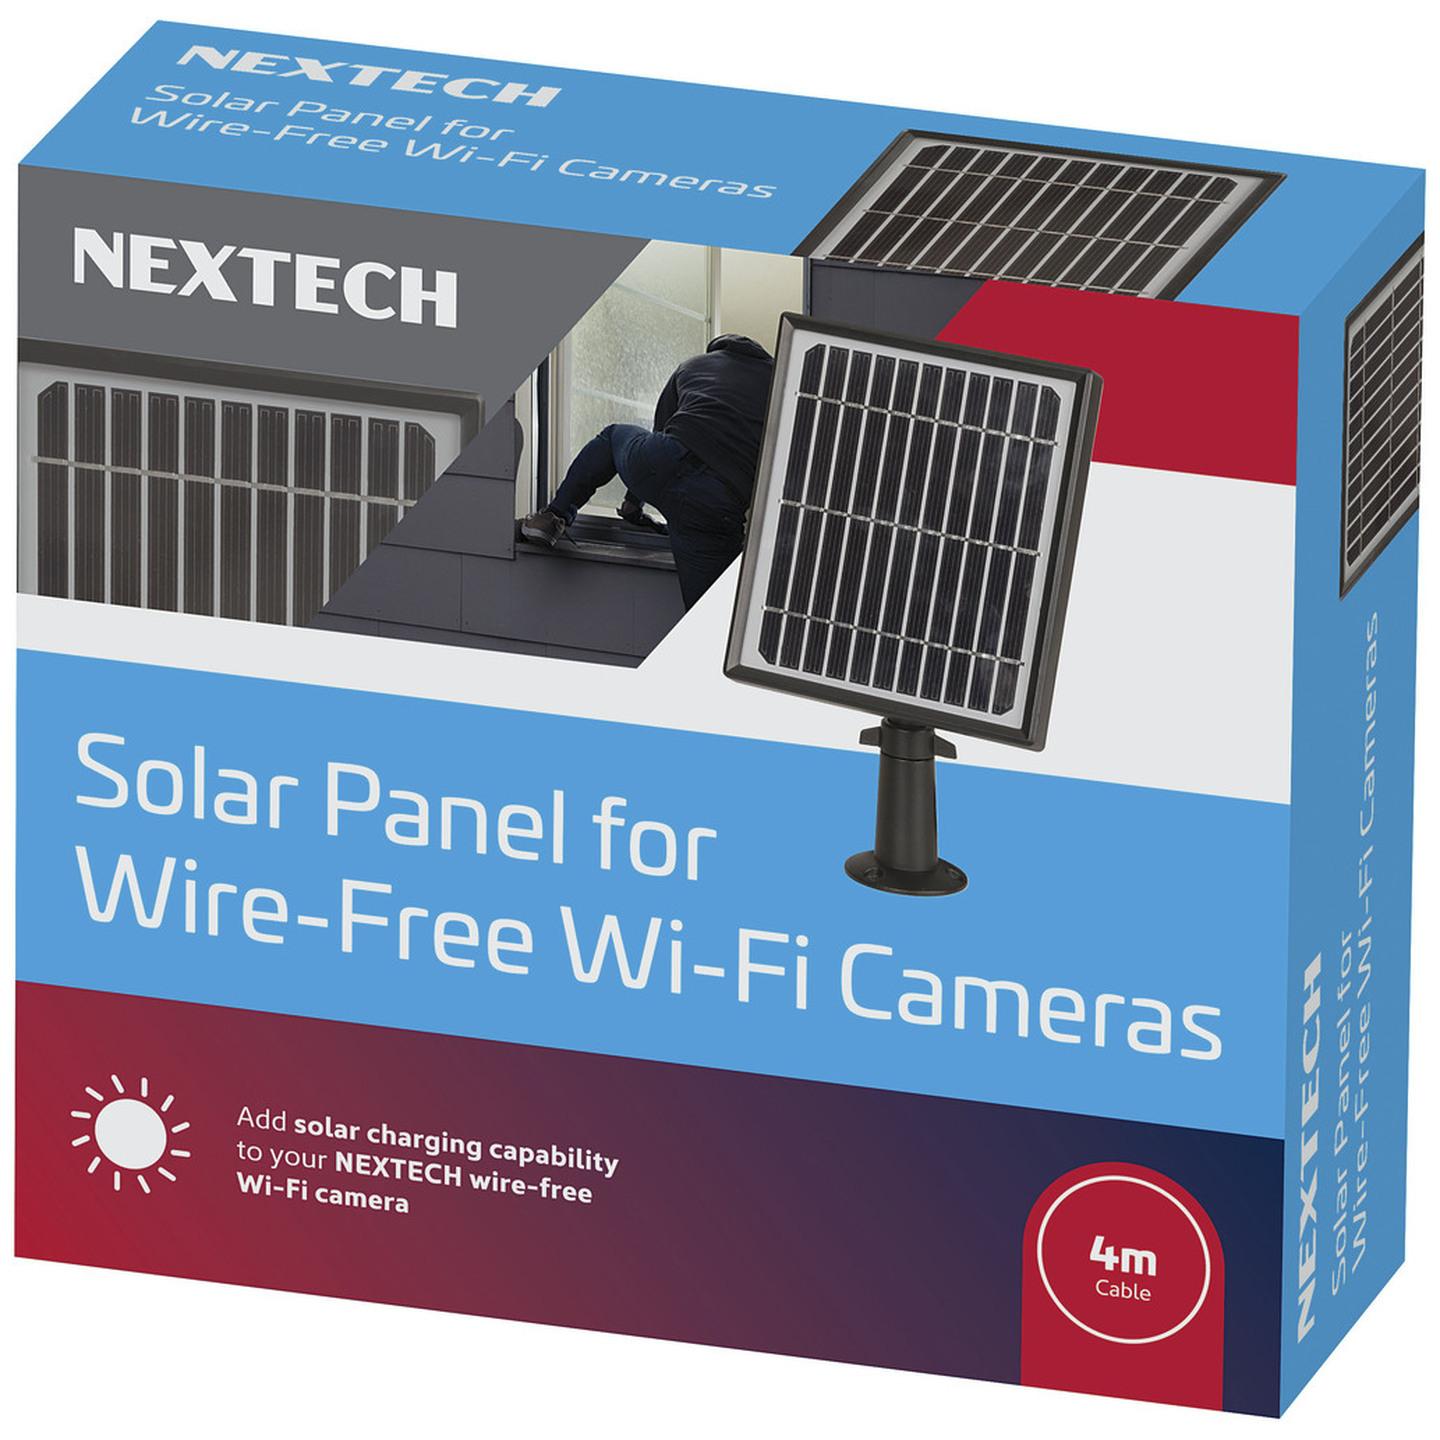 Solar Panel Suitable for Wire-Free Wi-Fi Cameras